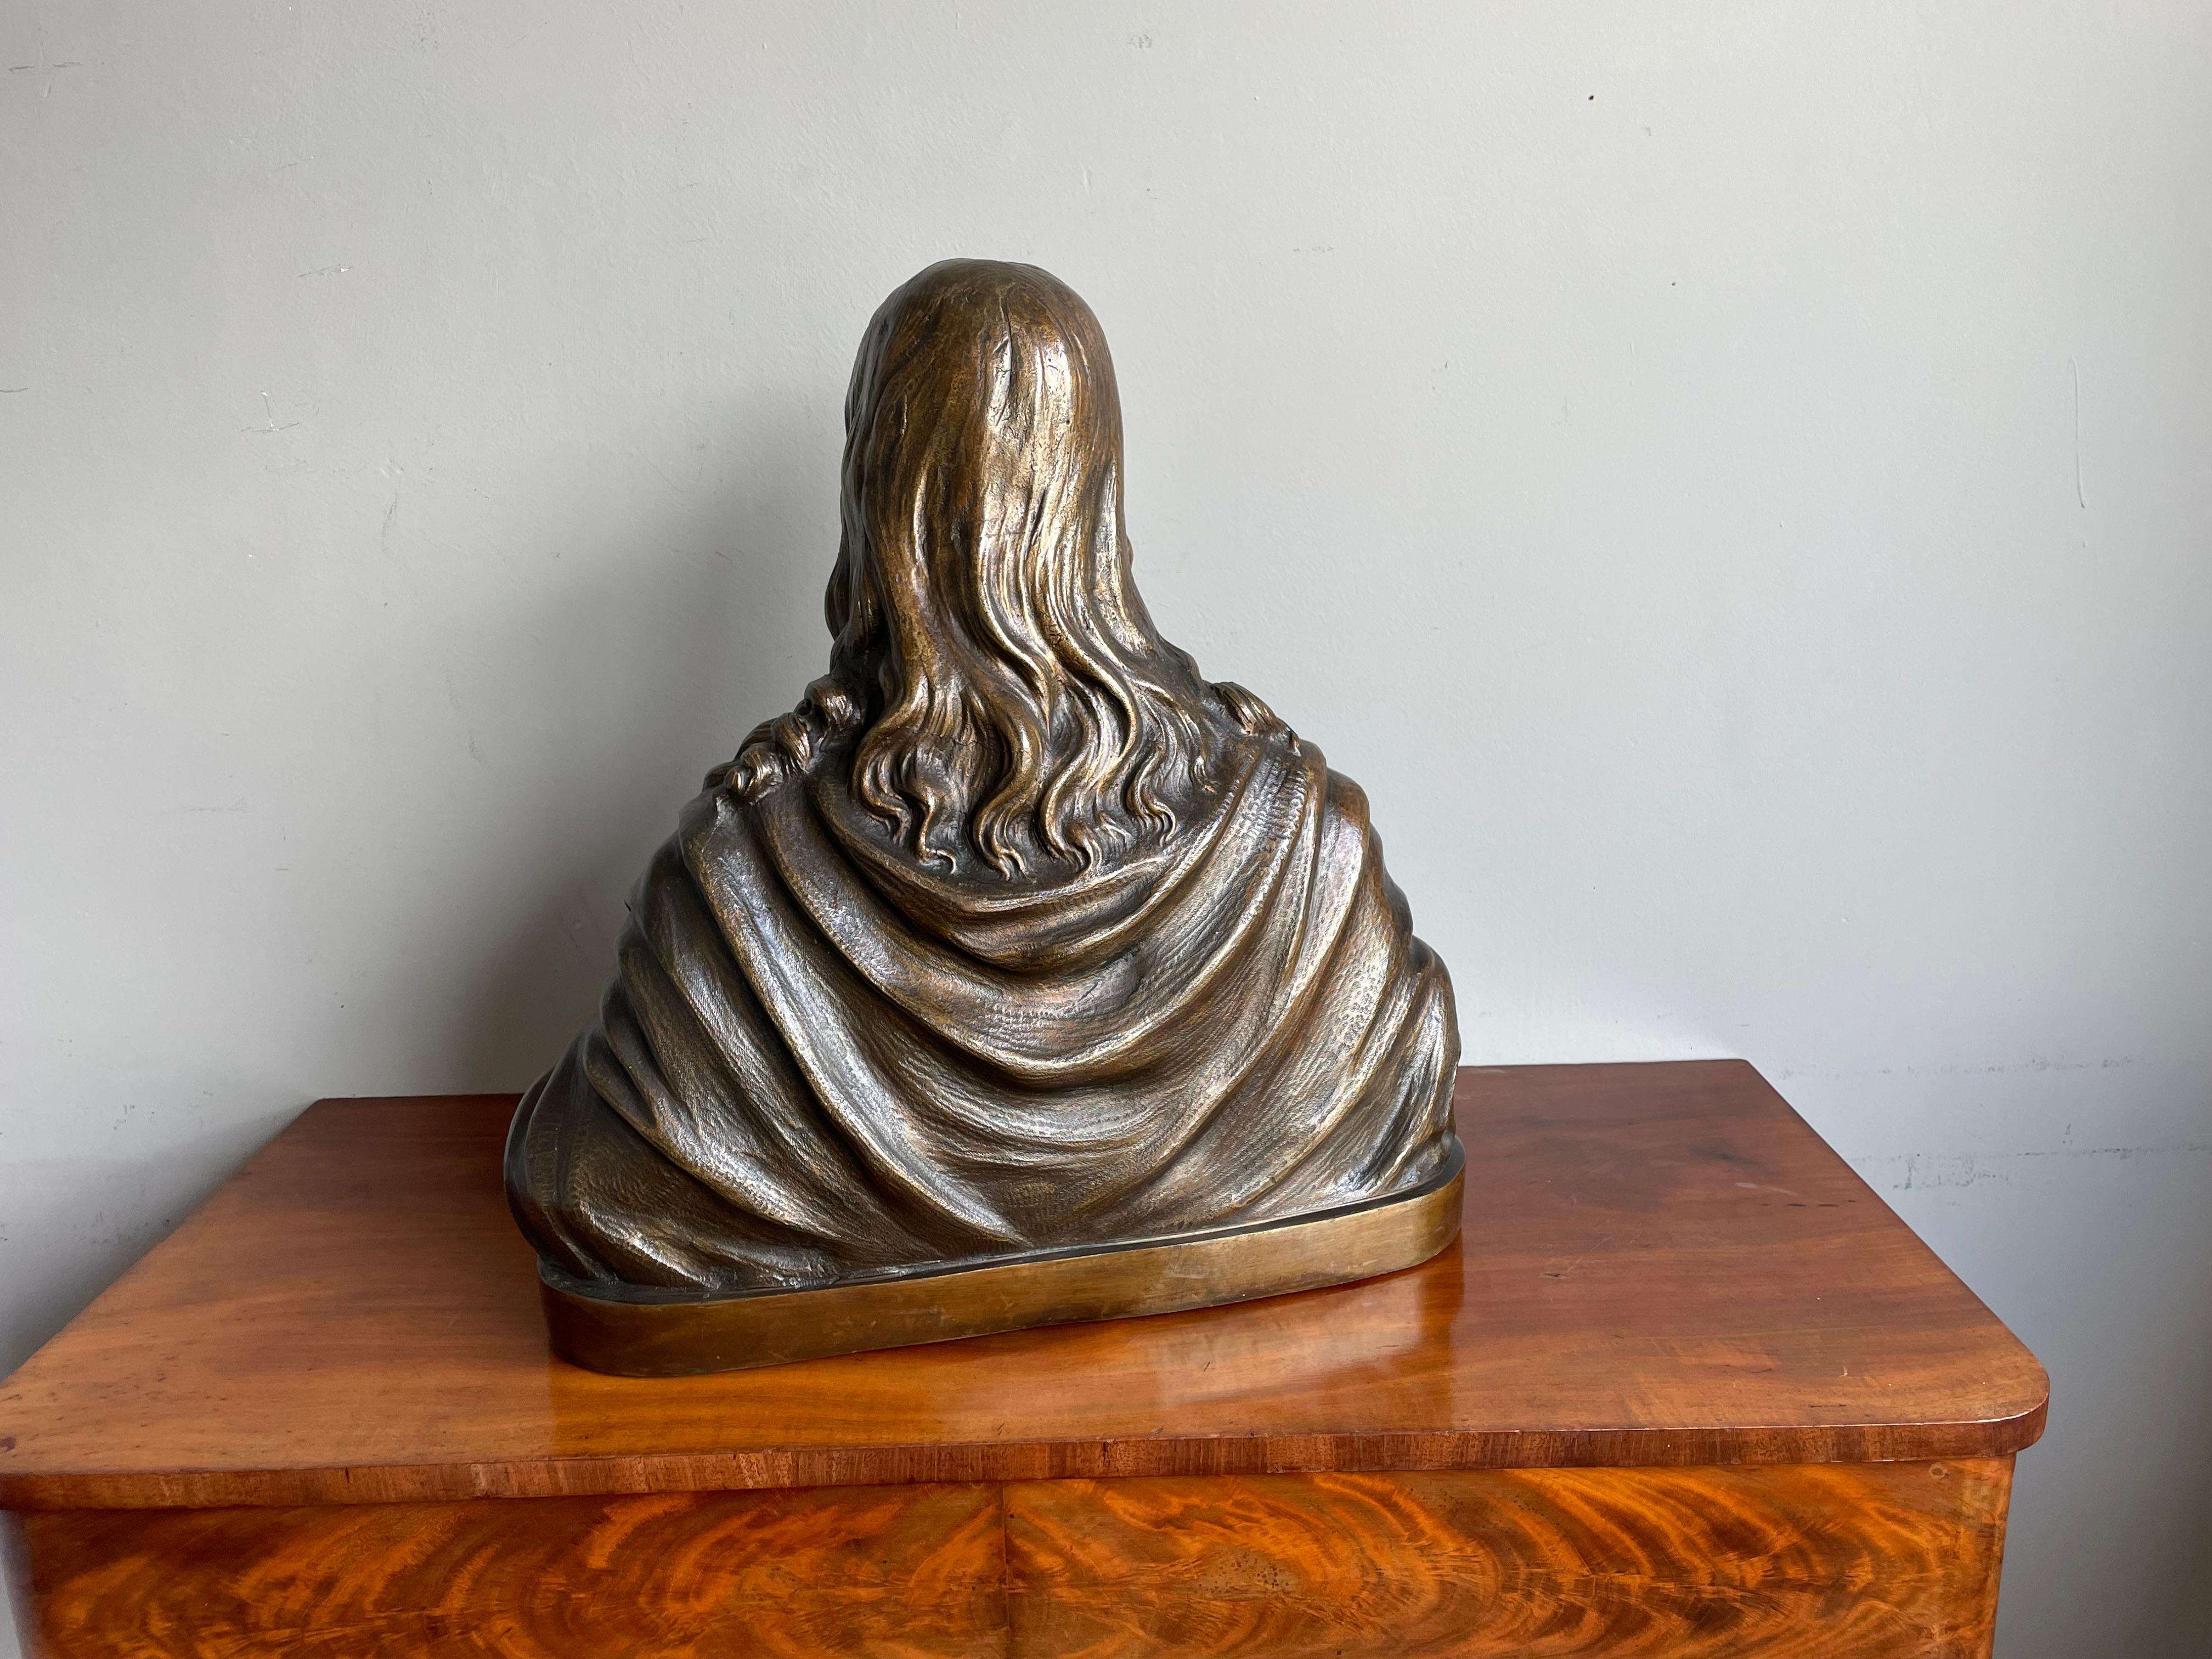 Rare Antique Bronze Holy Heart Sculpture / Bust of Our Lord Jesus Christ 1920 For Sale 7